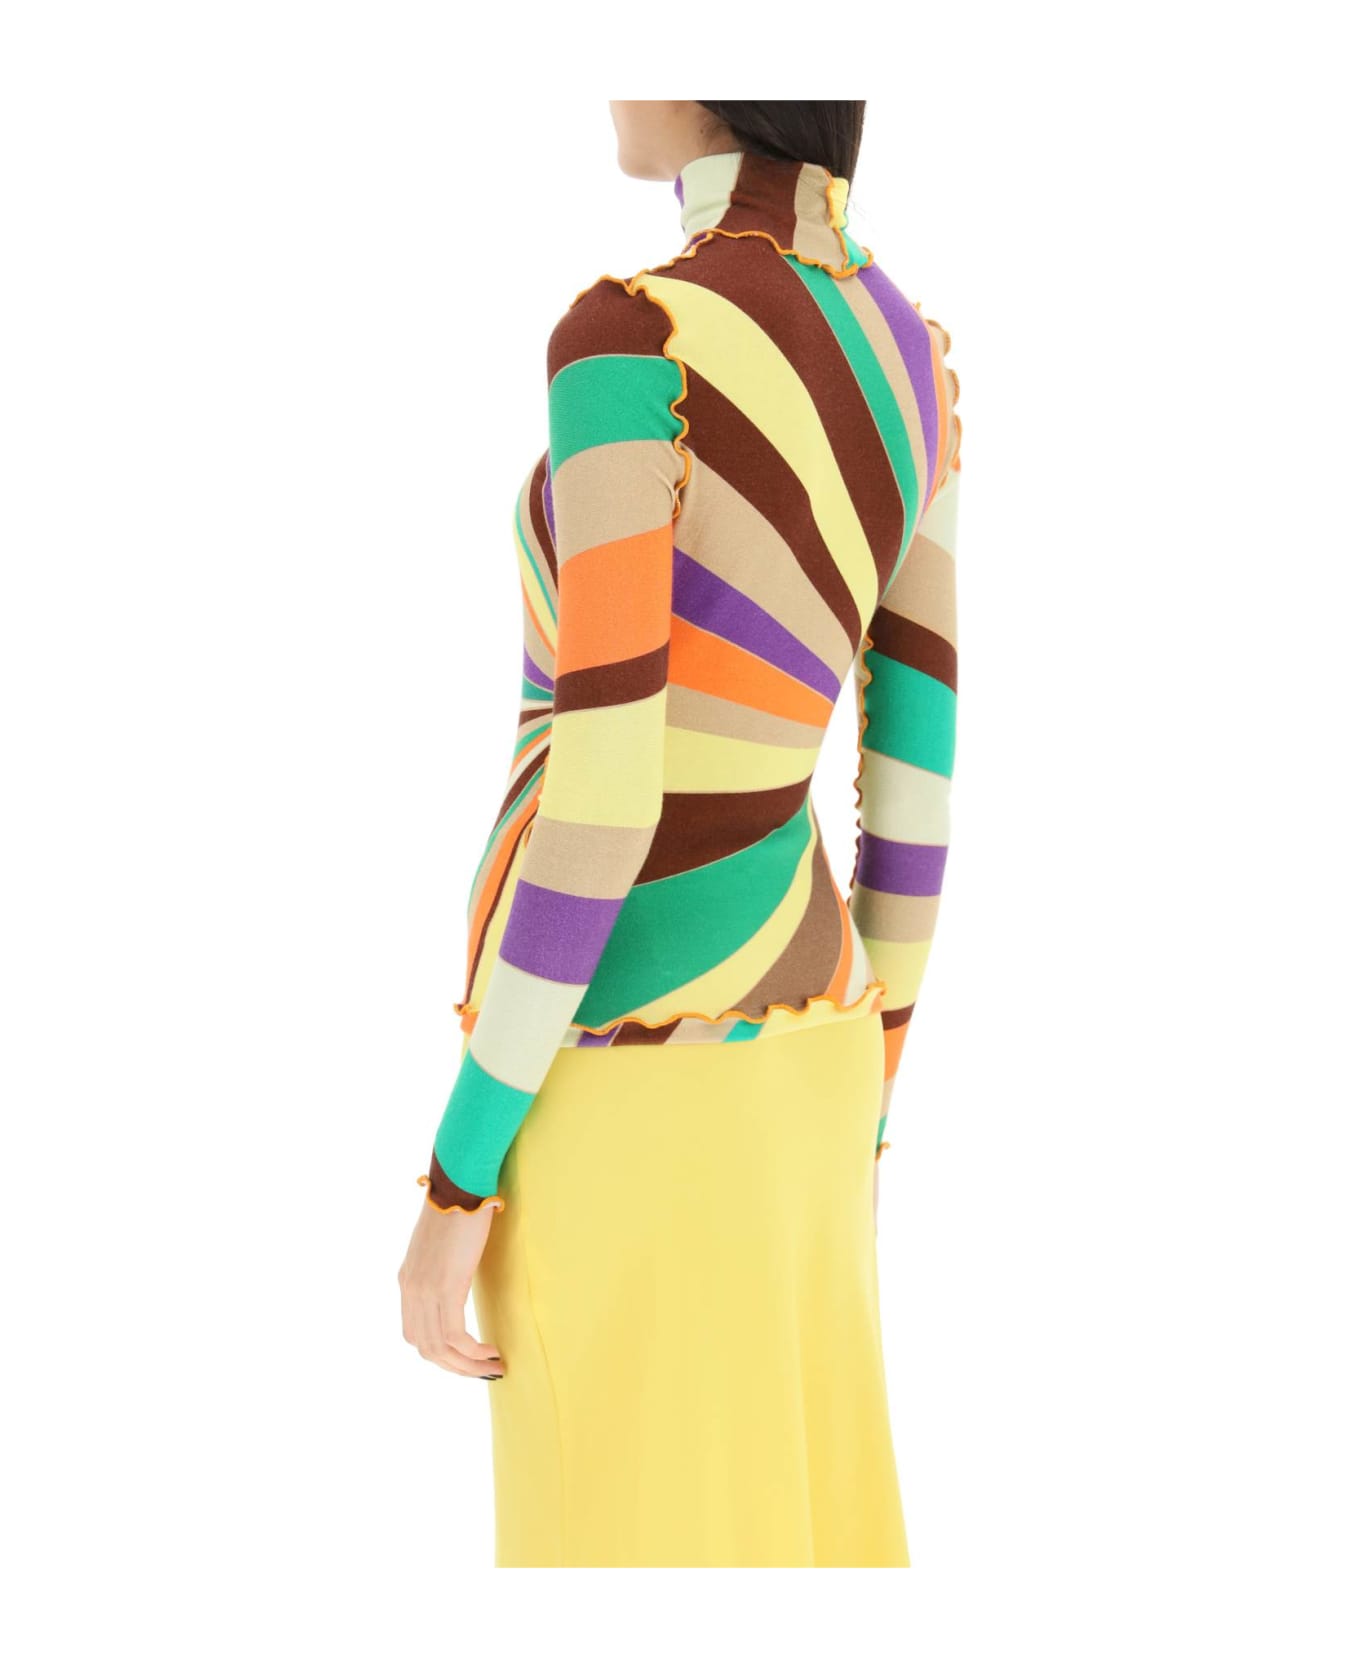 SIEDRES Multicolored Turtleneck Sweater With Gathered Stitching - MULTI ニットウェア